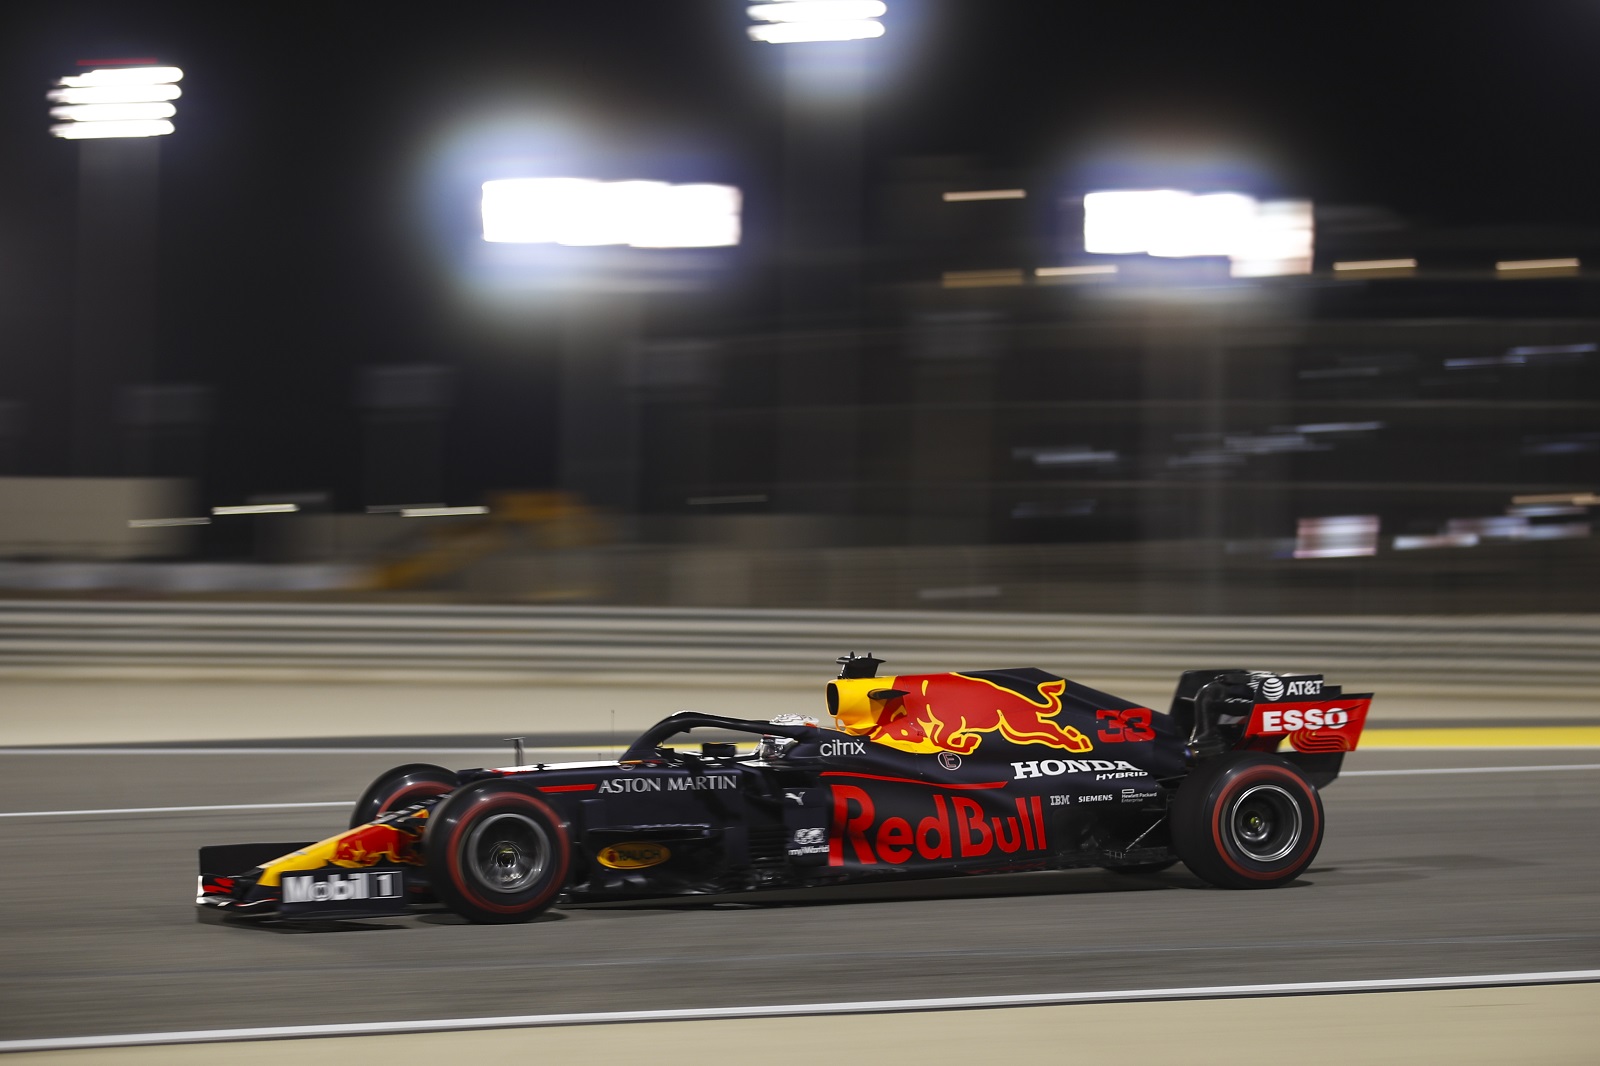 epa08862686 Dutch Formula One driver Max Verstappen of Aston Martin Red Bull Racing in action during the second practice session of the Formula One Sakhir Grand Prix at Bahrain International Circuit near Manama, Bahrain, 04 December 2020. The Formula One Sakhir Grand Prix will take place on 06 December 2020.  EPA/Hamad I Mohamed / Pool